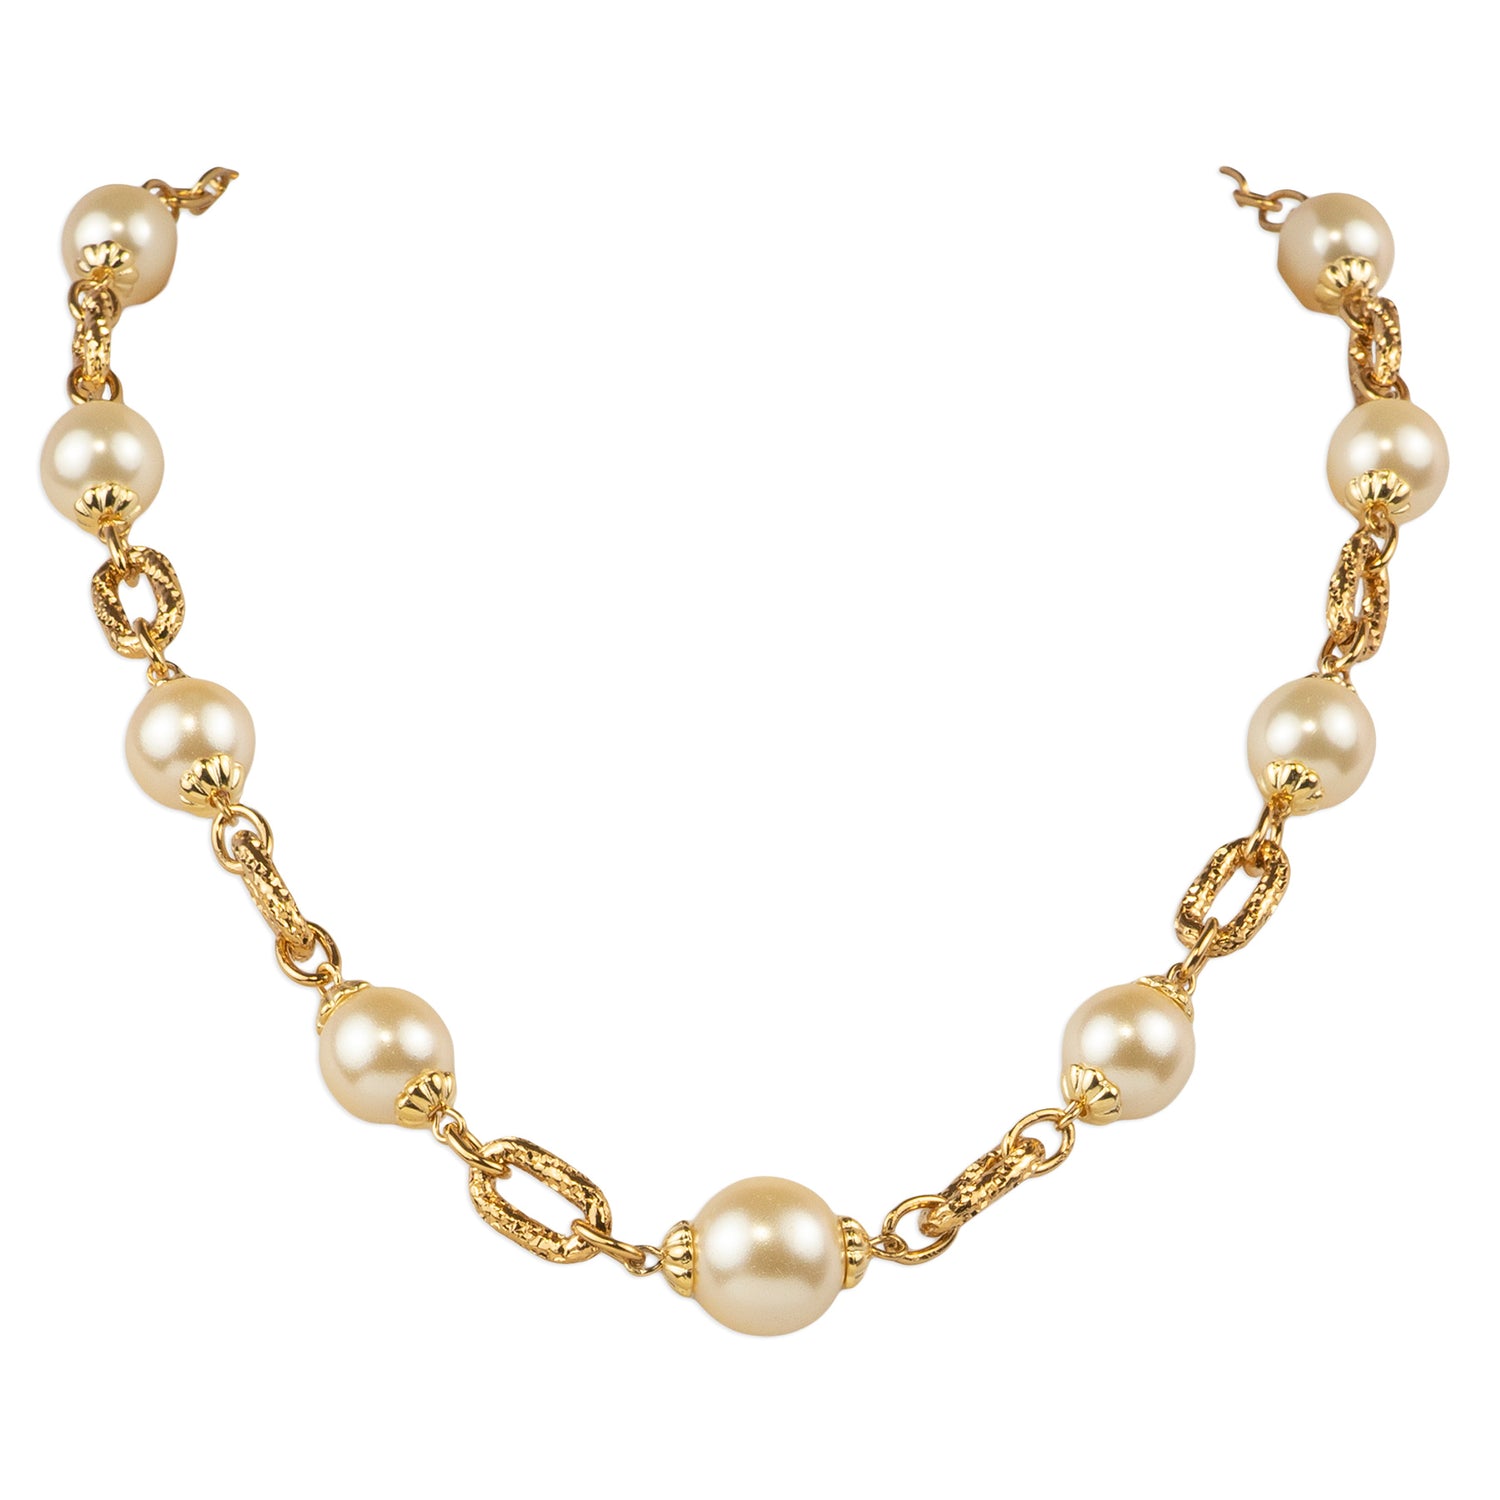 Chain and pearl choker necklace